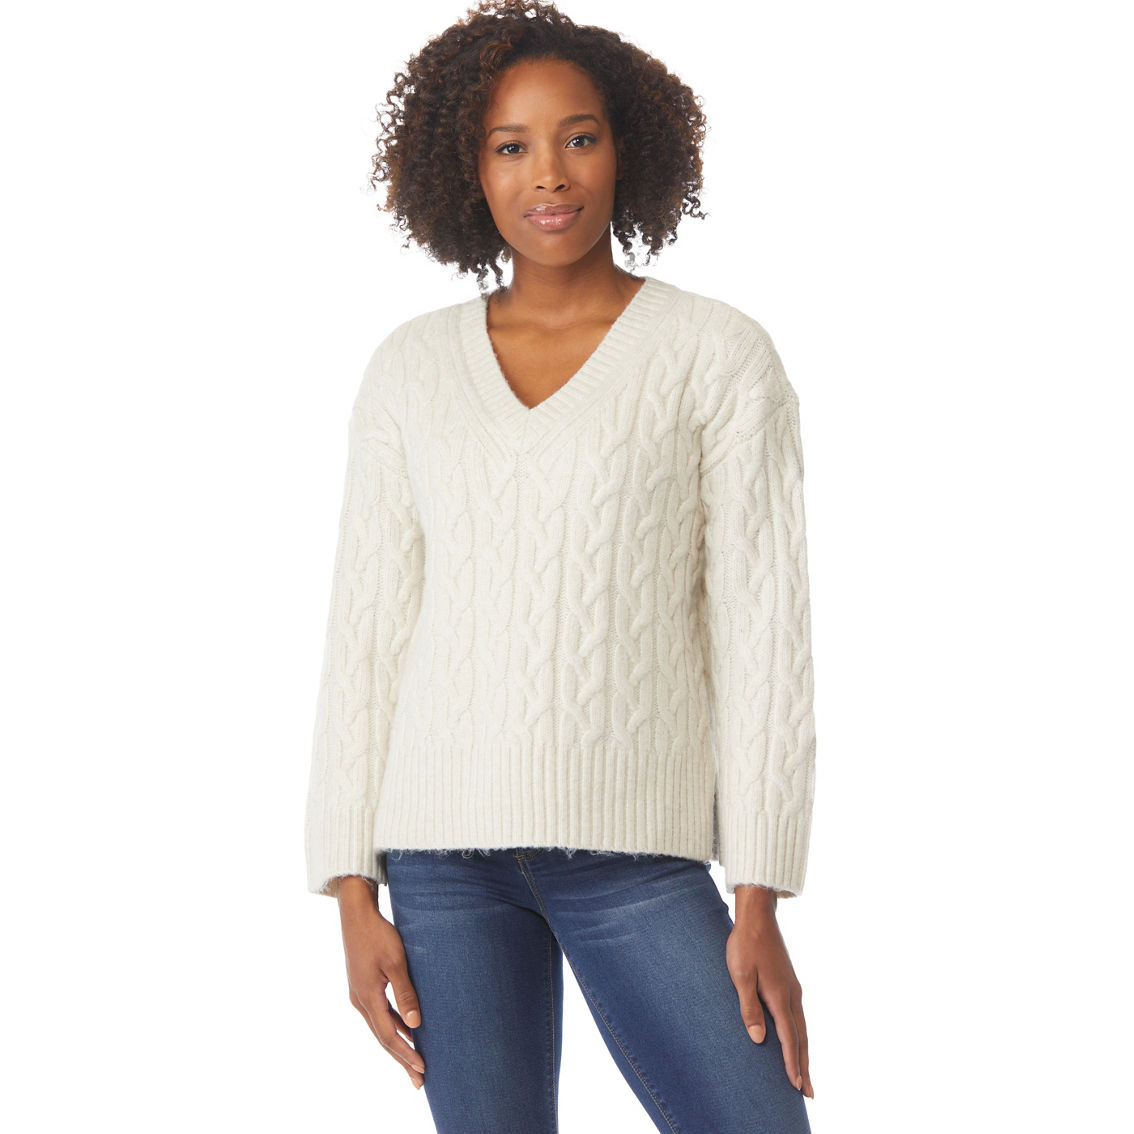 Calvin Klein V Neck Cable Knit Sweater | Sweaters | Clothing ...